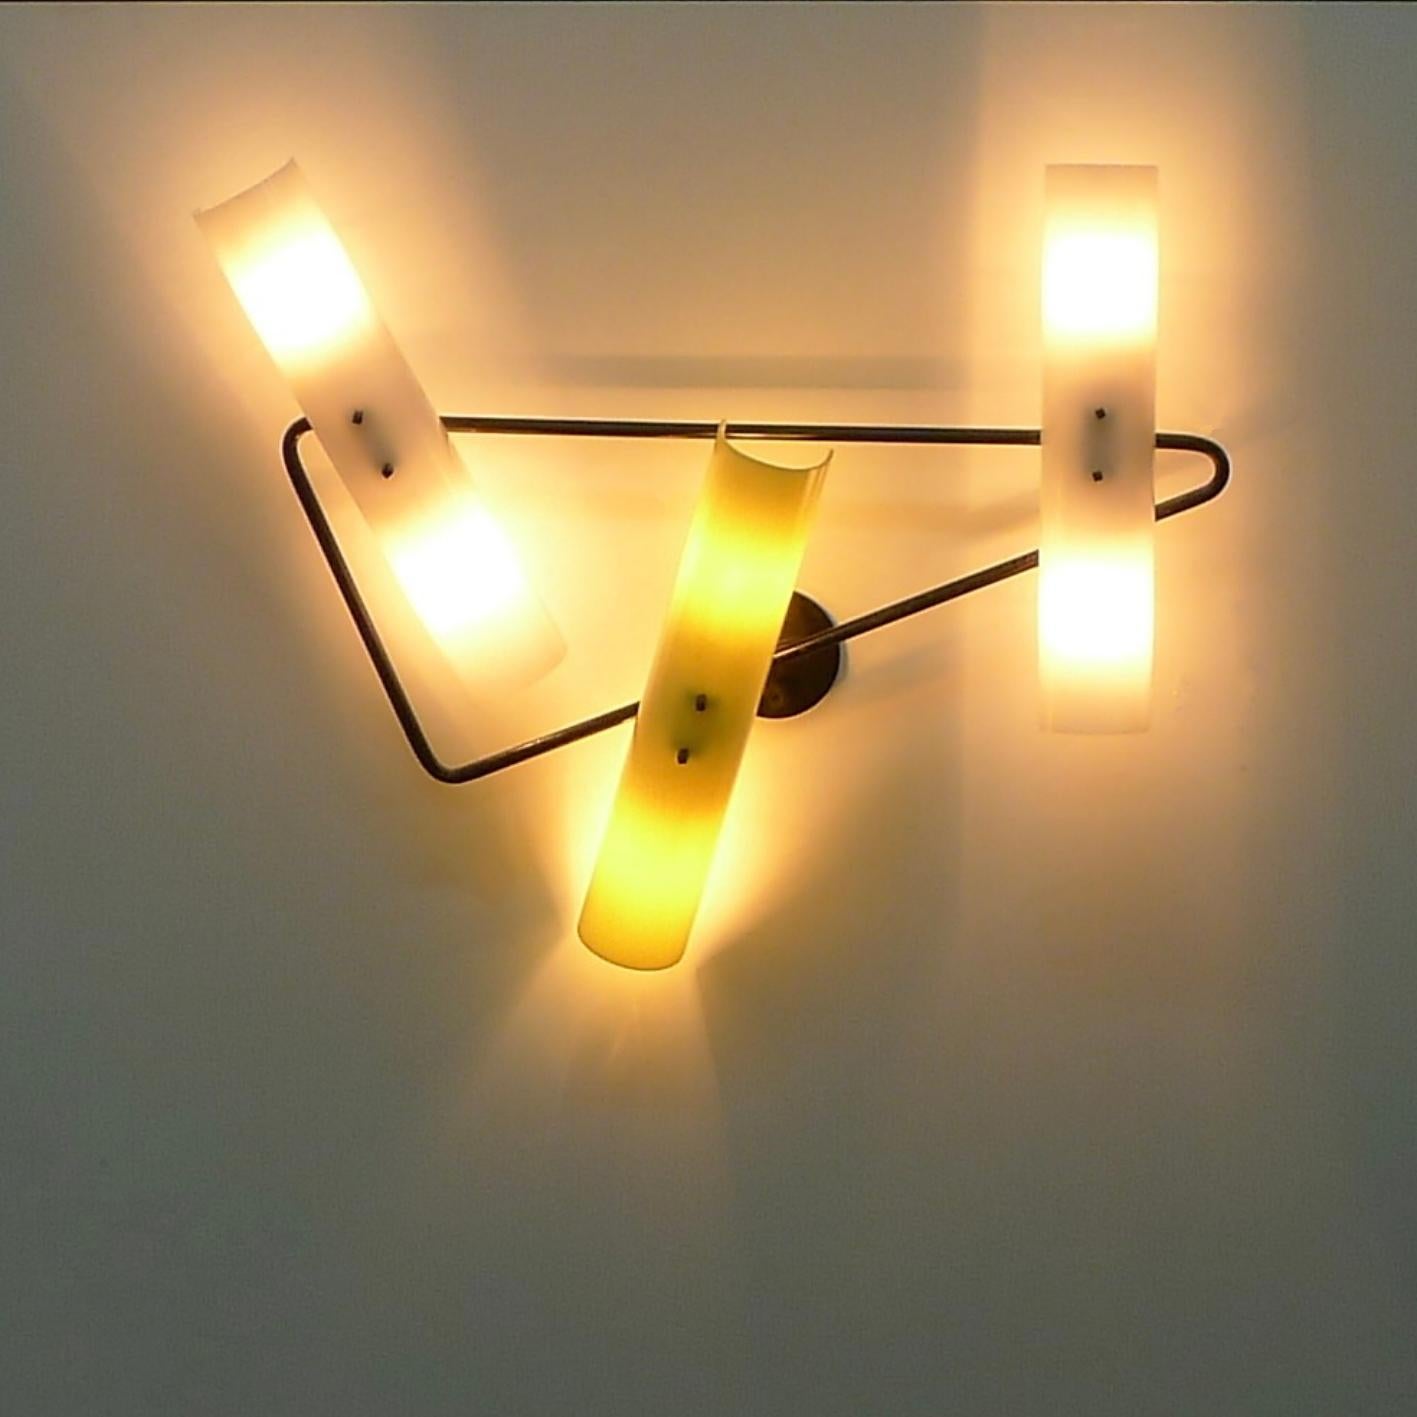 Stilnovo wall light, Yellow and White Acrylic Shades, Triangular Frame, 1960s For Sale 4